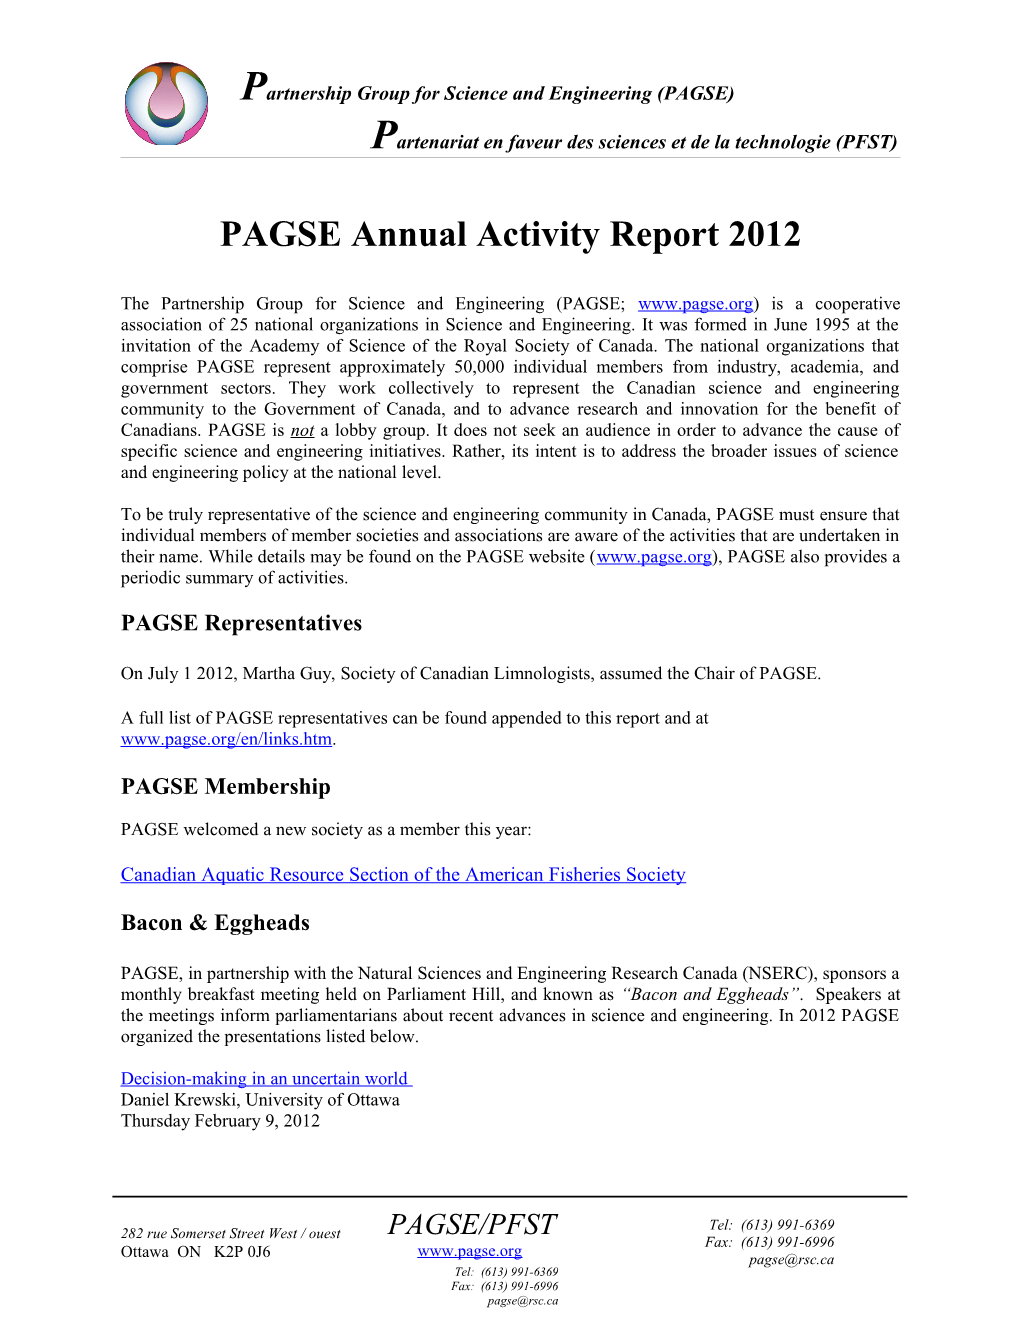 PAGSE Annual Activity Report 2007-2008